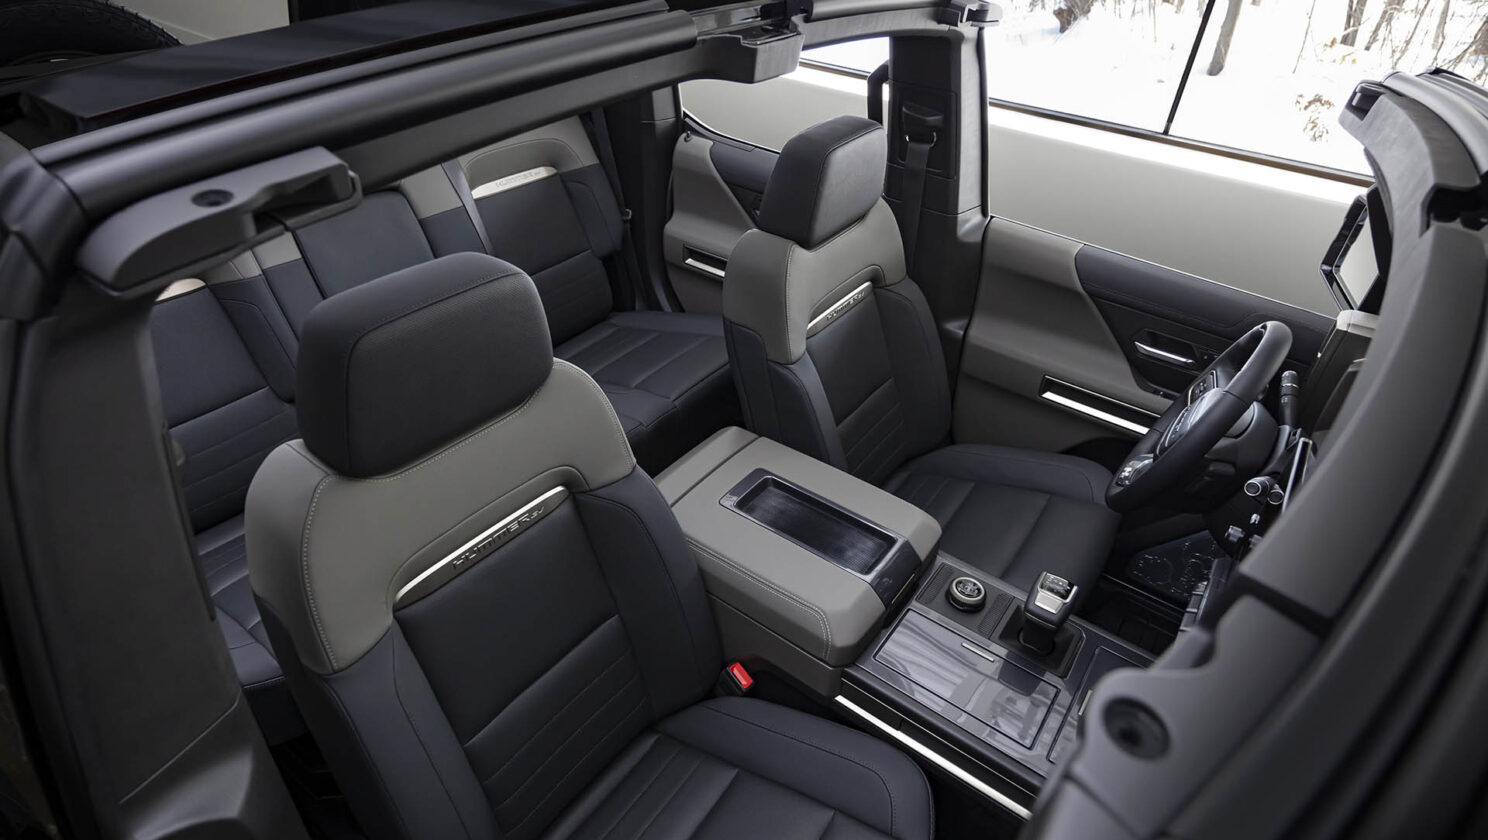 The GMC HUMMER EV SUV debuts in the low-contrast Lunar Shadow in